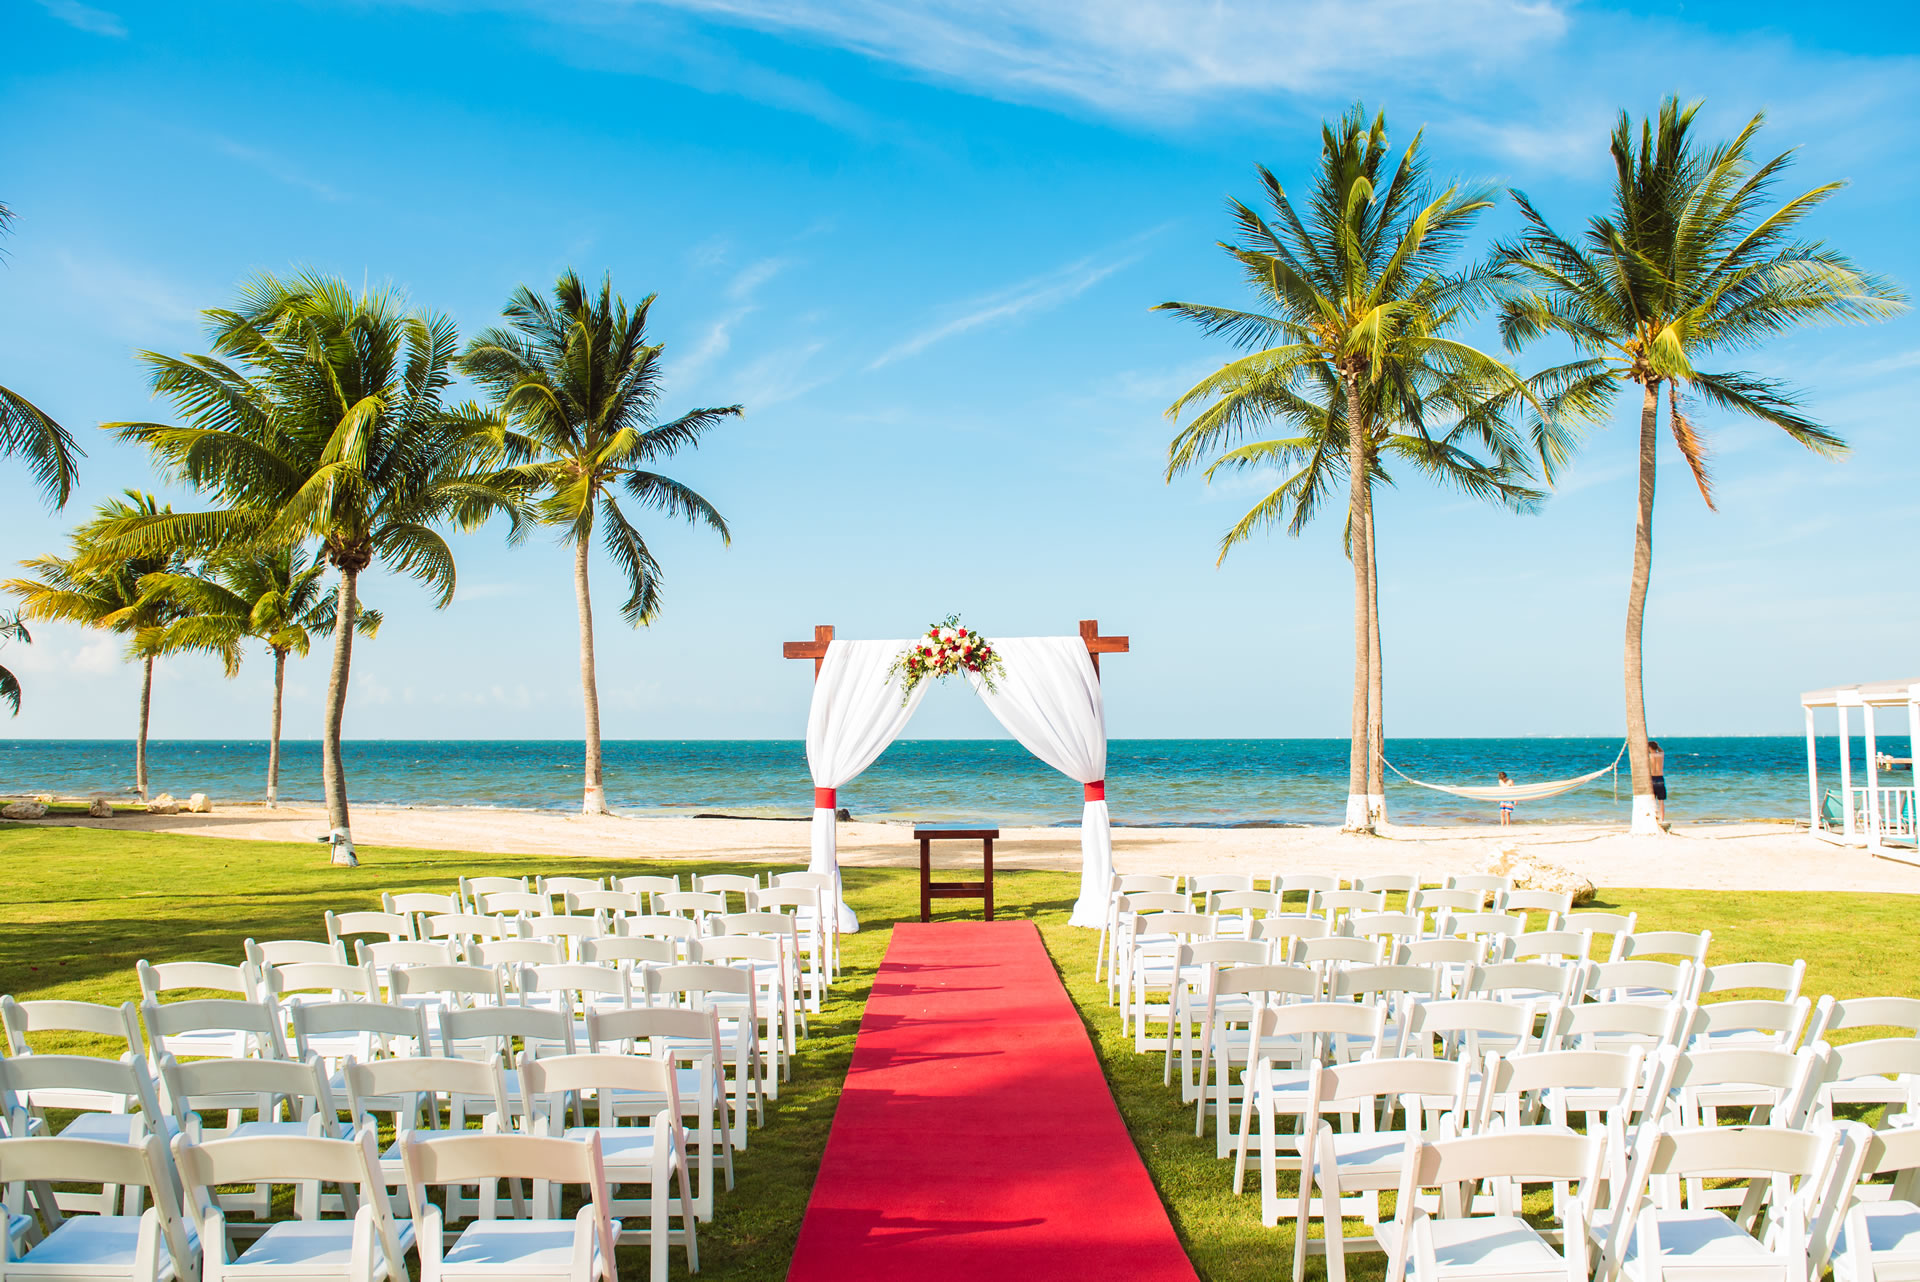 A wedding arch at the end of a red carpet dividing rows of white folding chairs. The beach of the Grand Caymanian Resort is in the background.